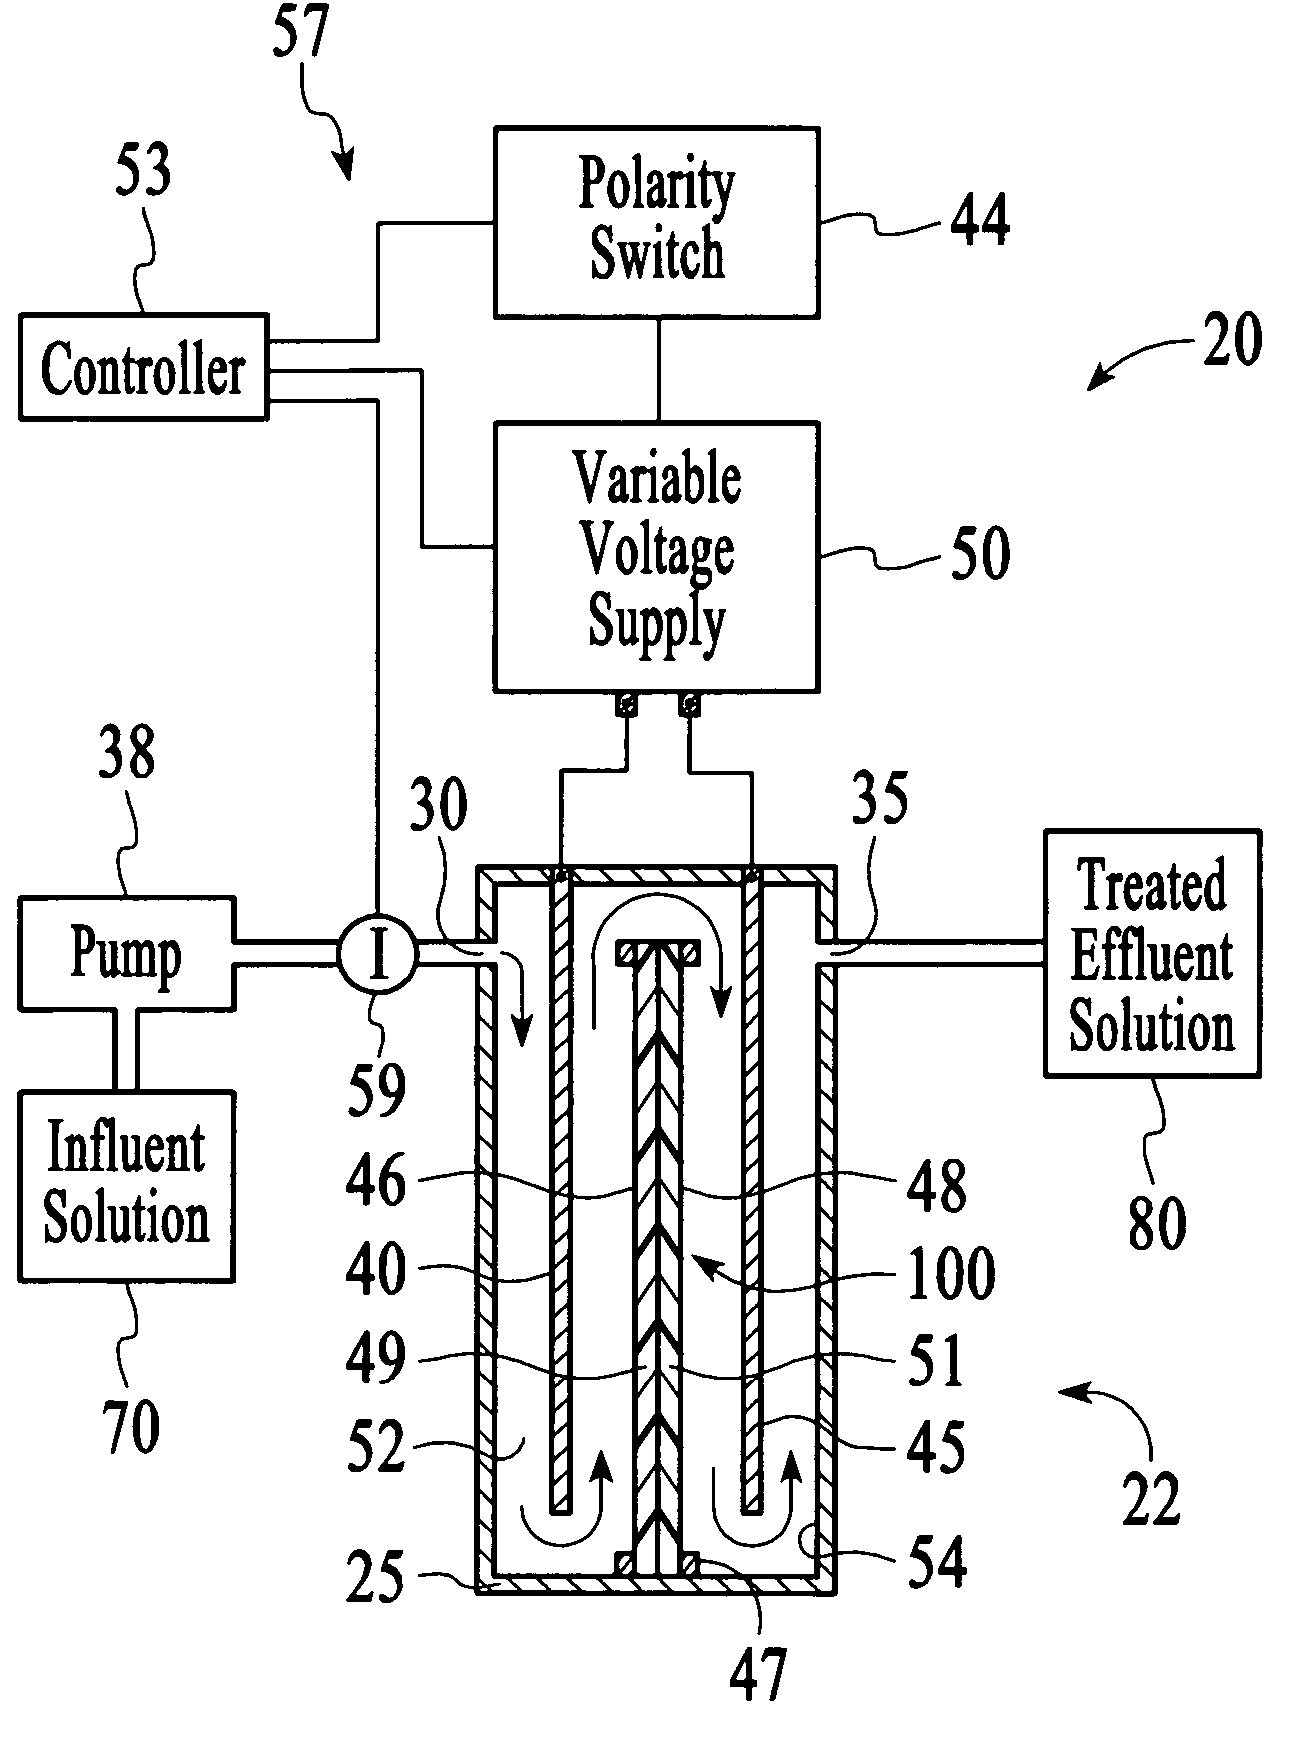 Selectable ion concentrations with electrolytic ion exchange